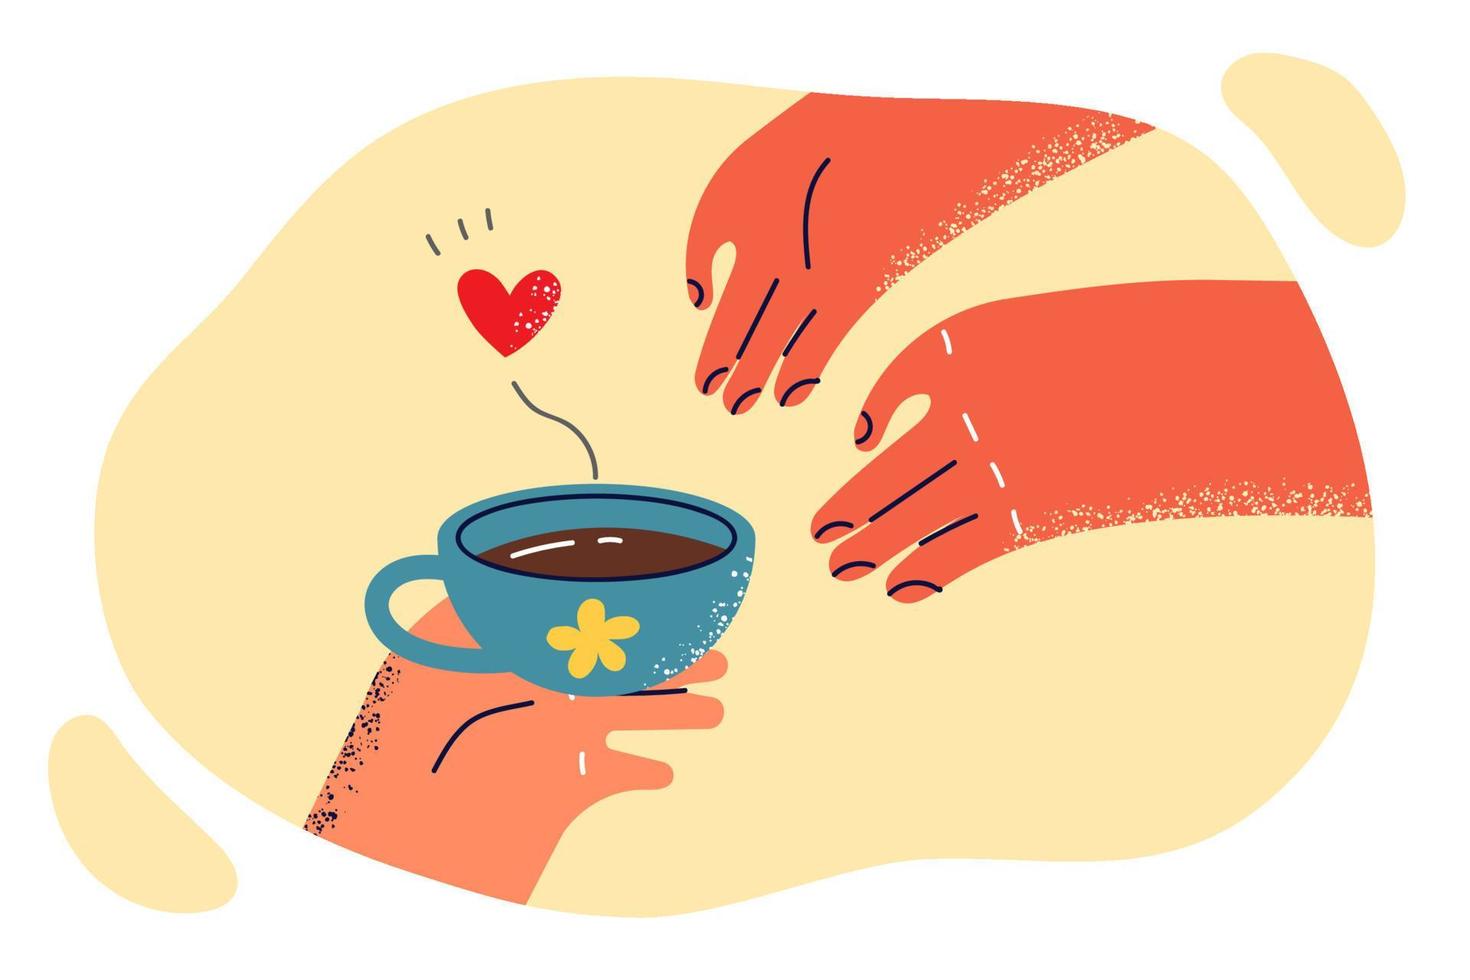 Hand passes freshly brewed coffee to another person as romantic gesture or courtship during love relationship. Cup of hot coffee with heart as metaphor for romantic present for loved one vector